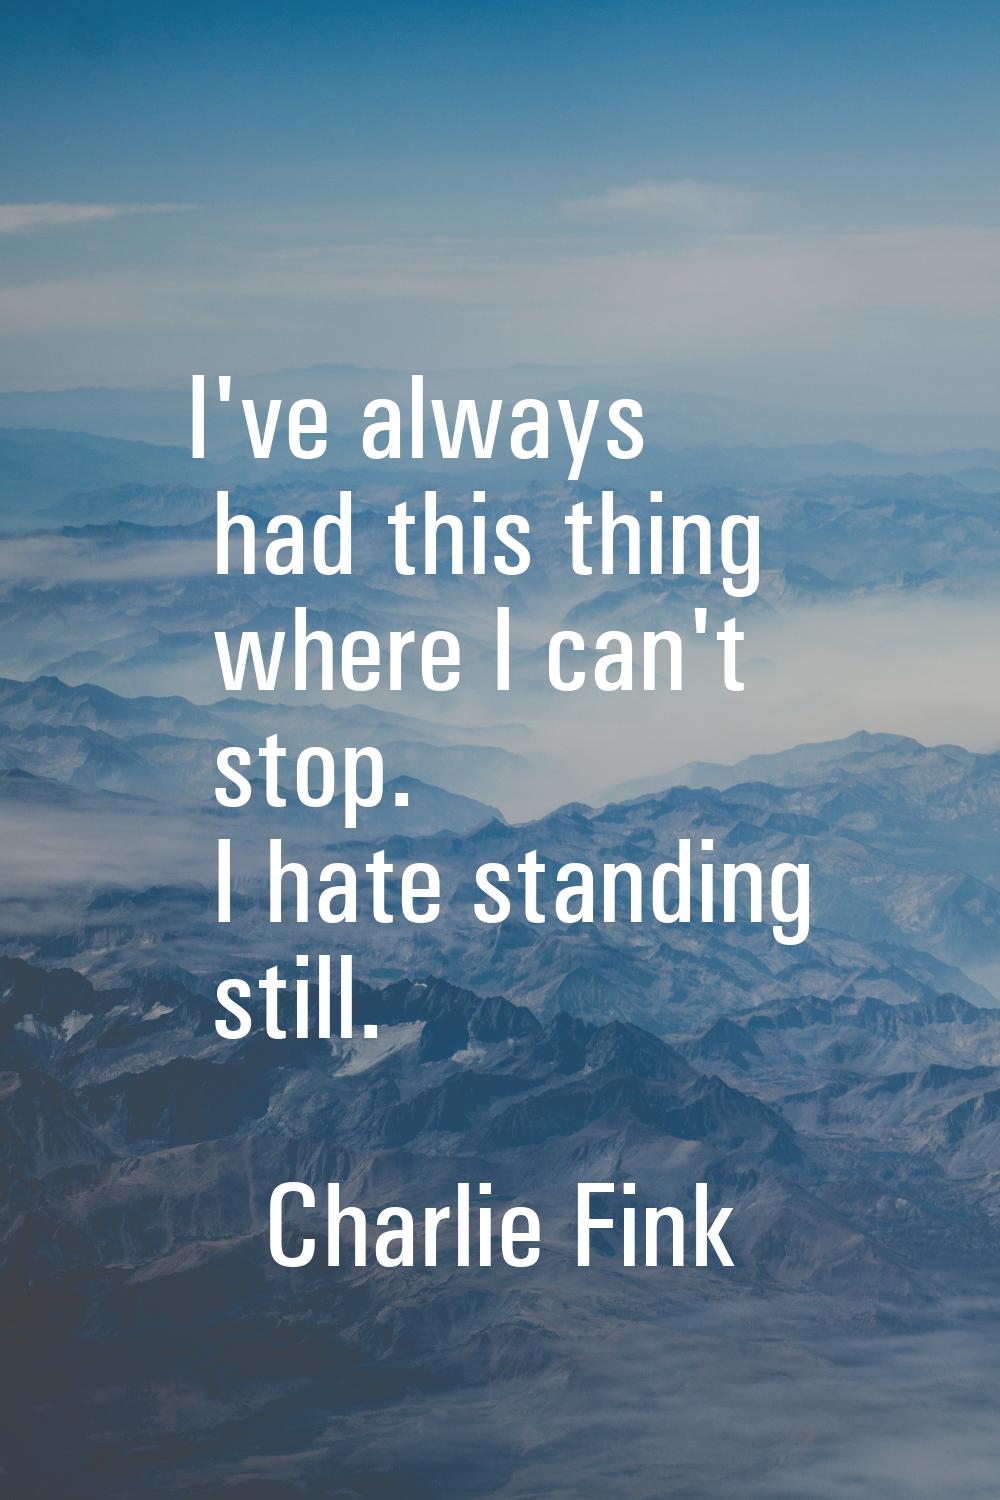 I've always had this thing where I can't stop. I hate standing still.